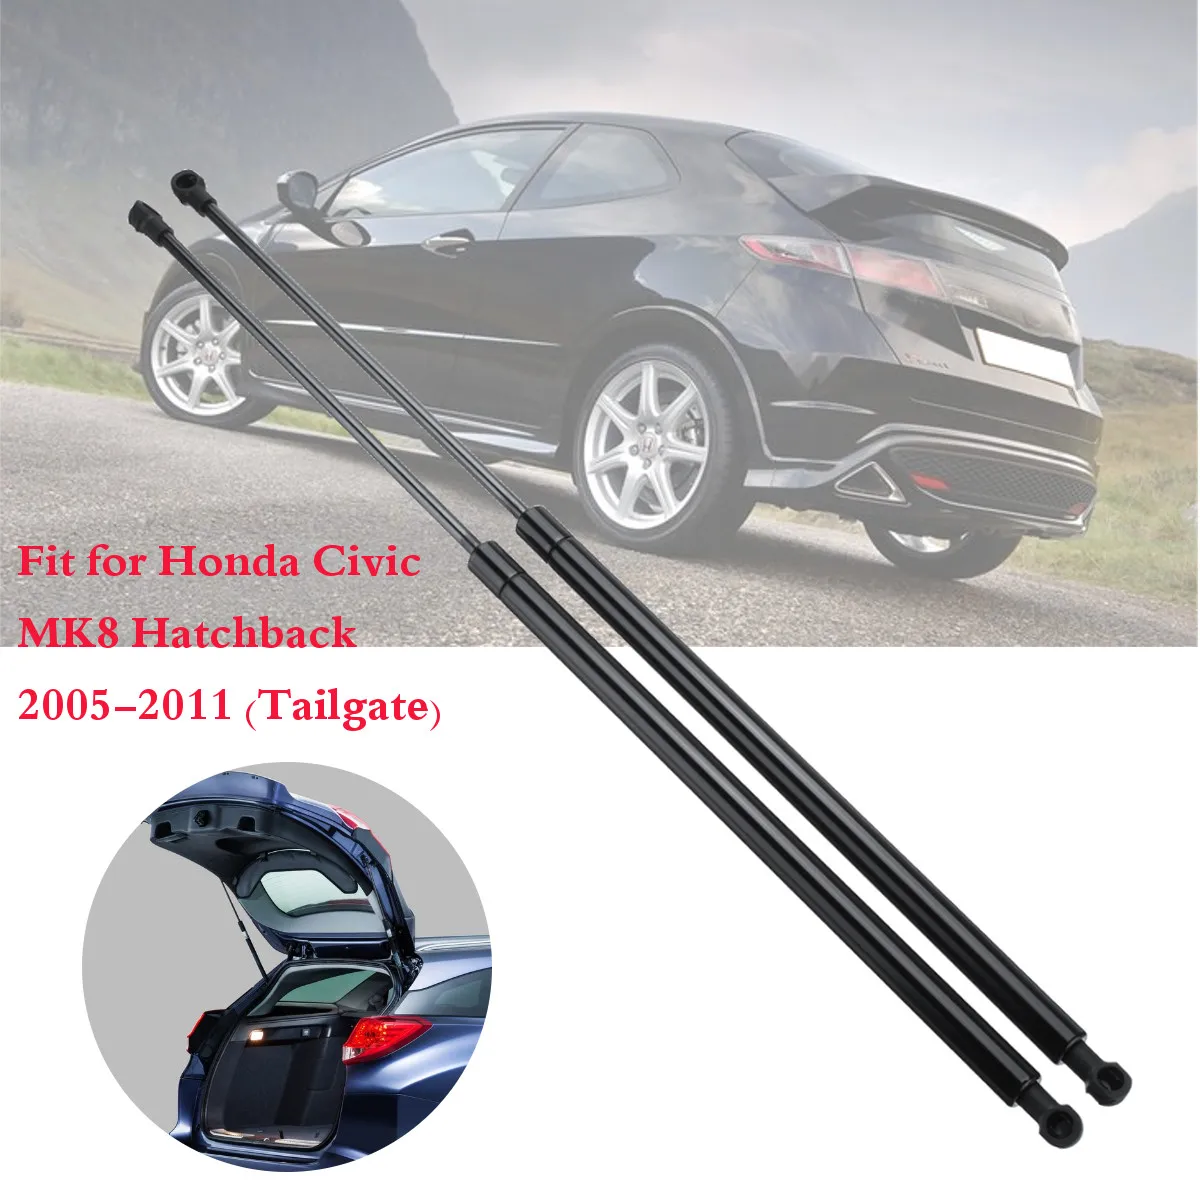 

2Pcs Car Rear Tailgate Boot Gas Struts Support For Honda for Civic MK8 Hatchback 2005-2011 74820SMGE01